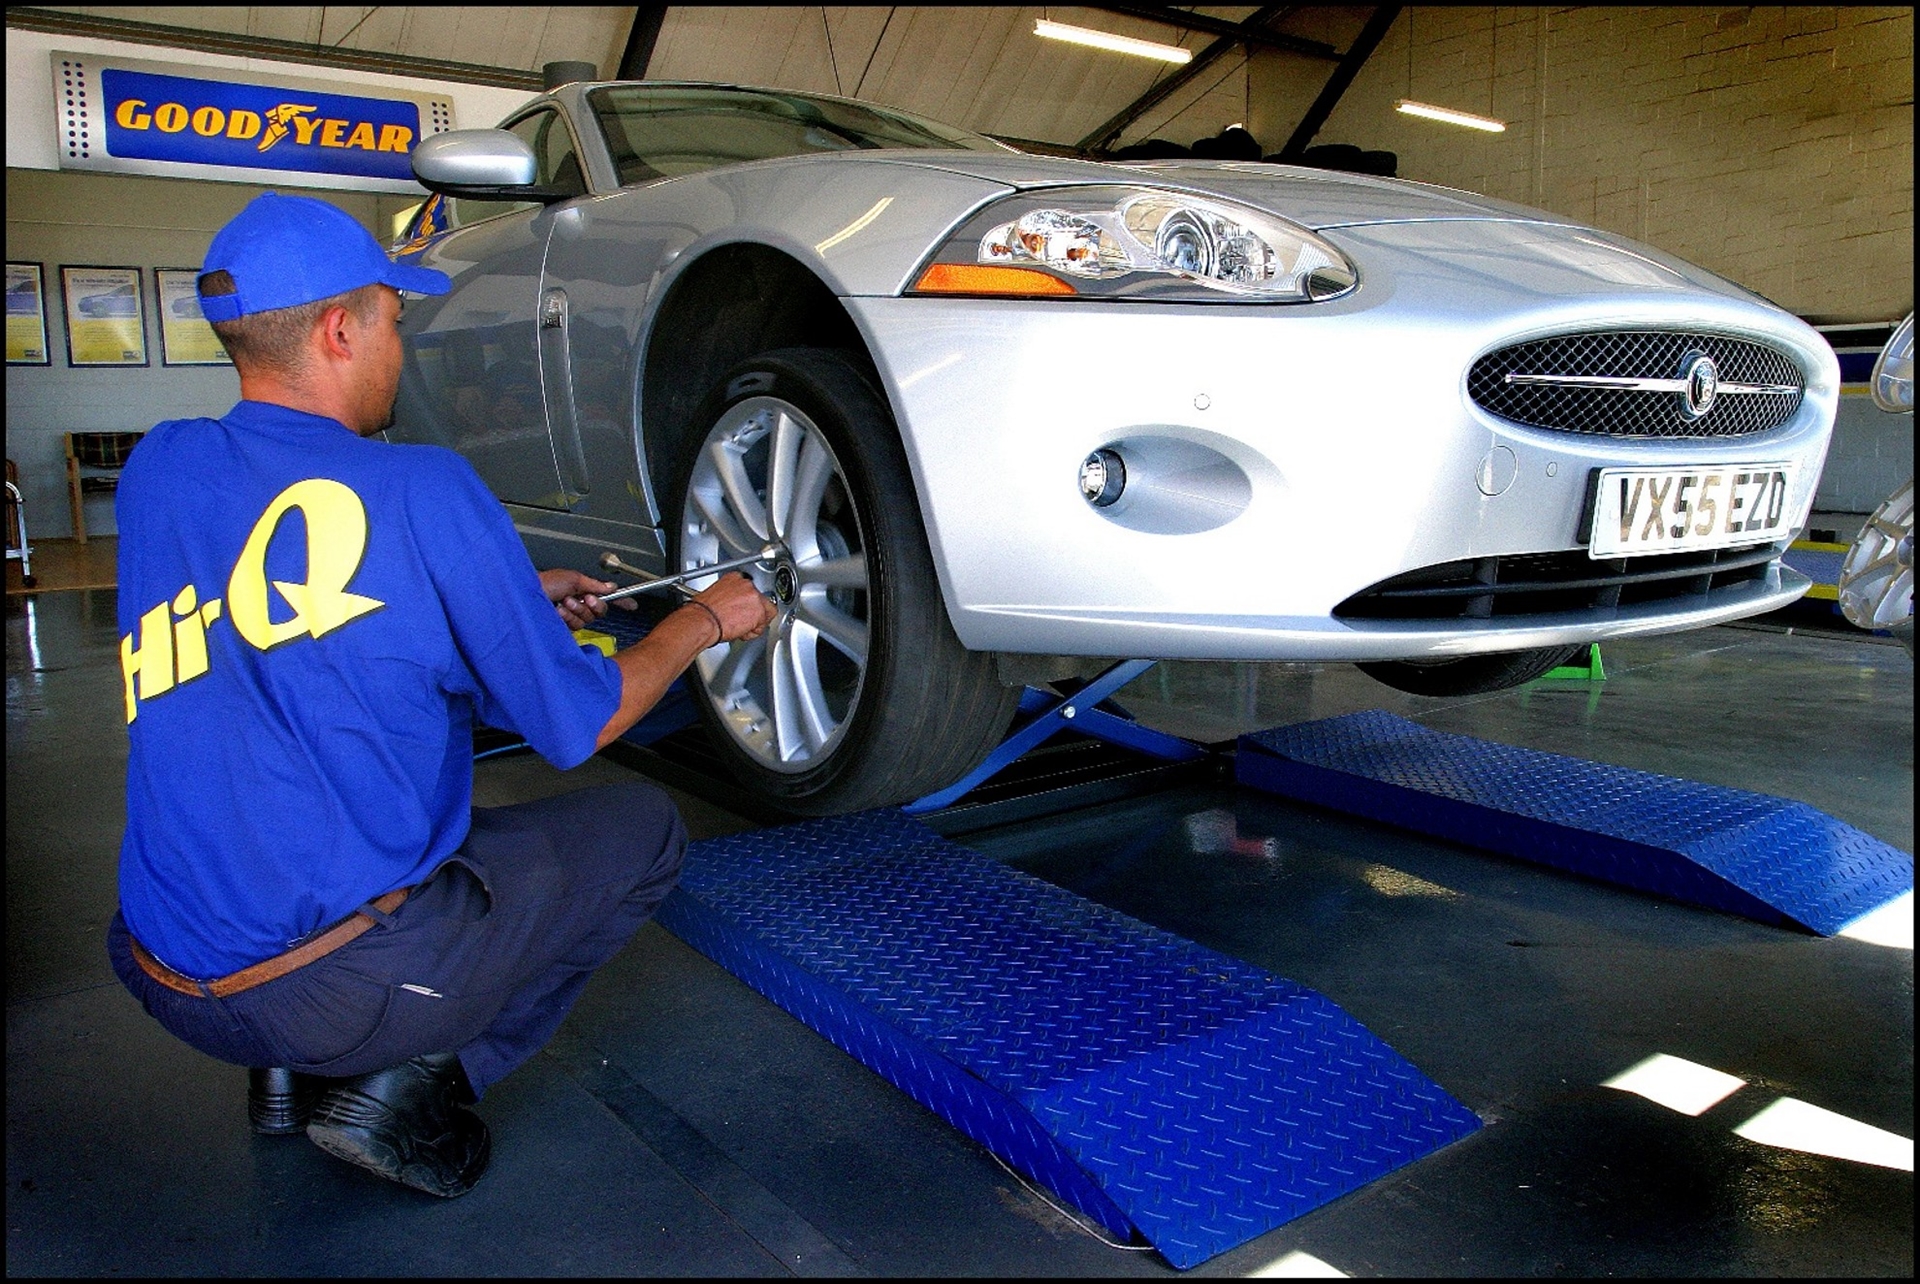 FREE VEHICLE CHECK FROM Hi-Q CAN ENSURE SAFE HOLIDAY